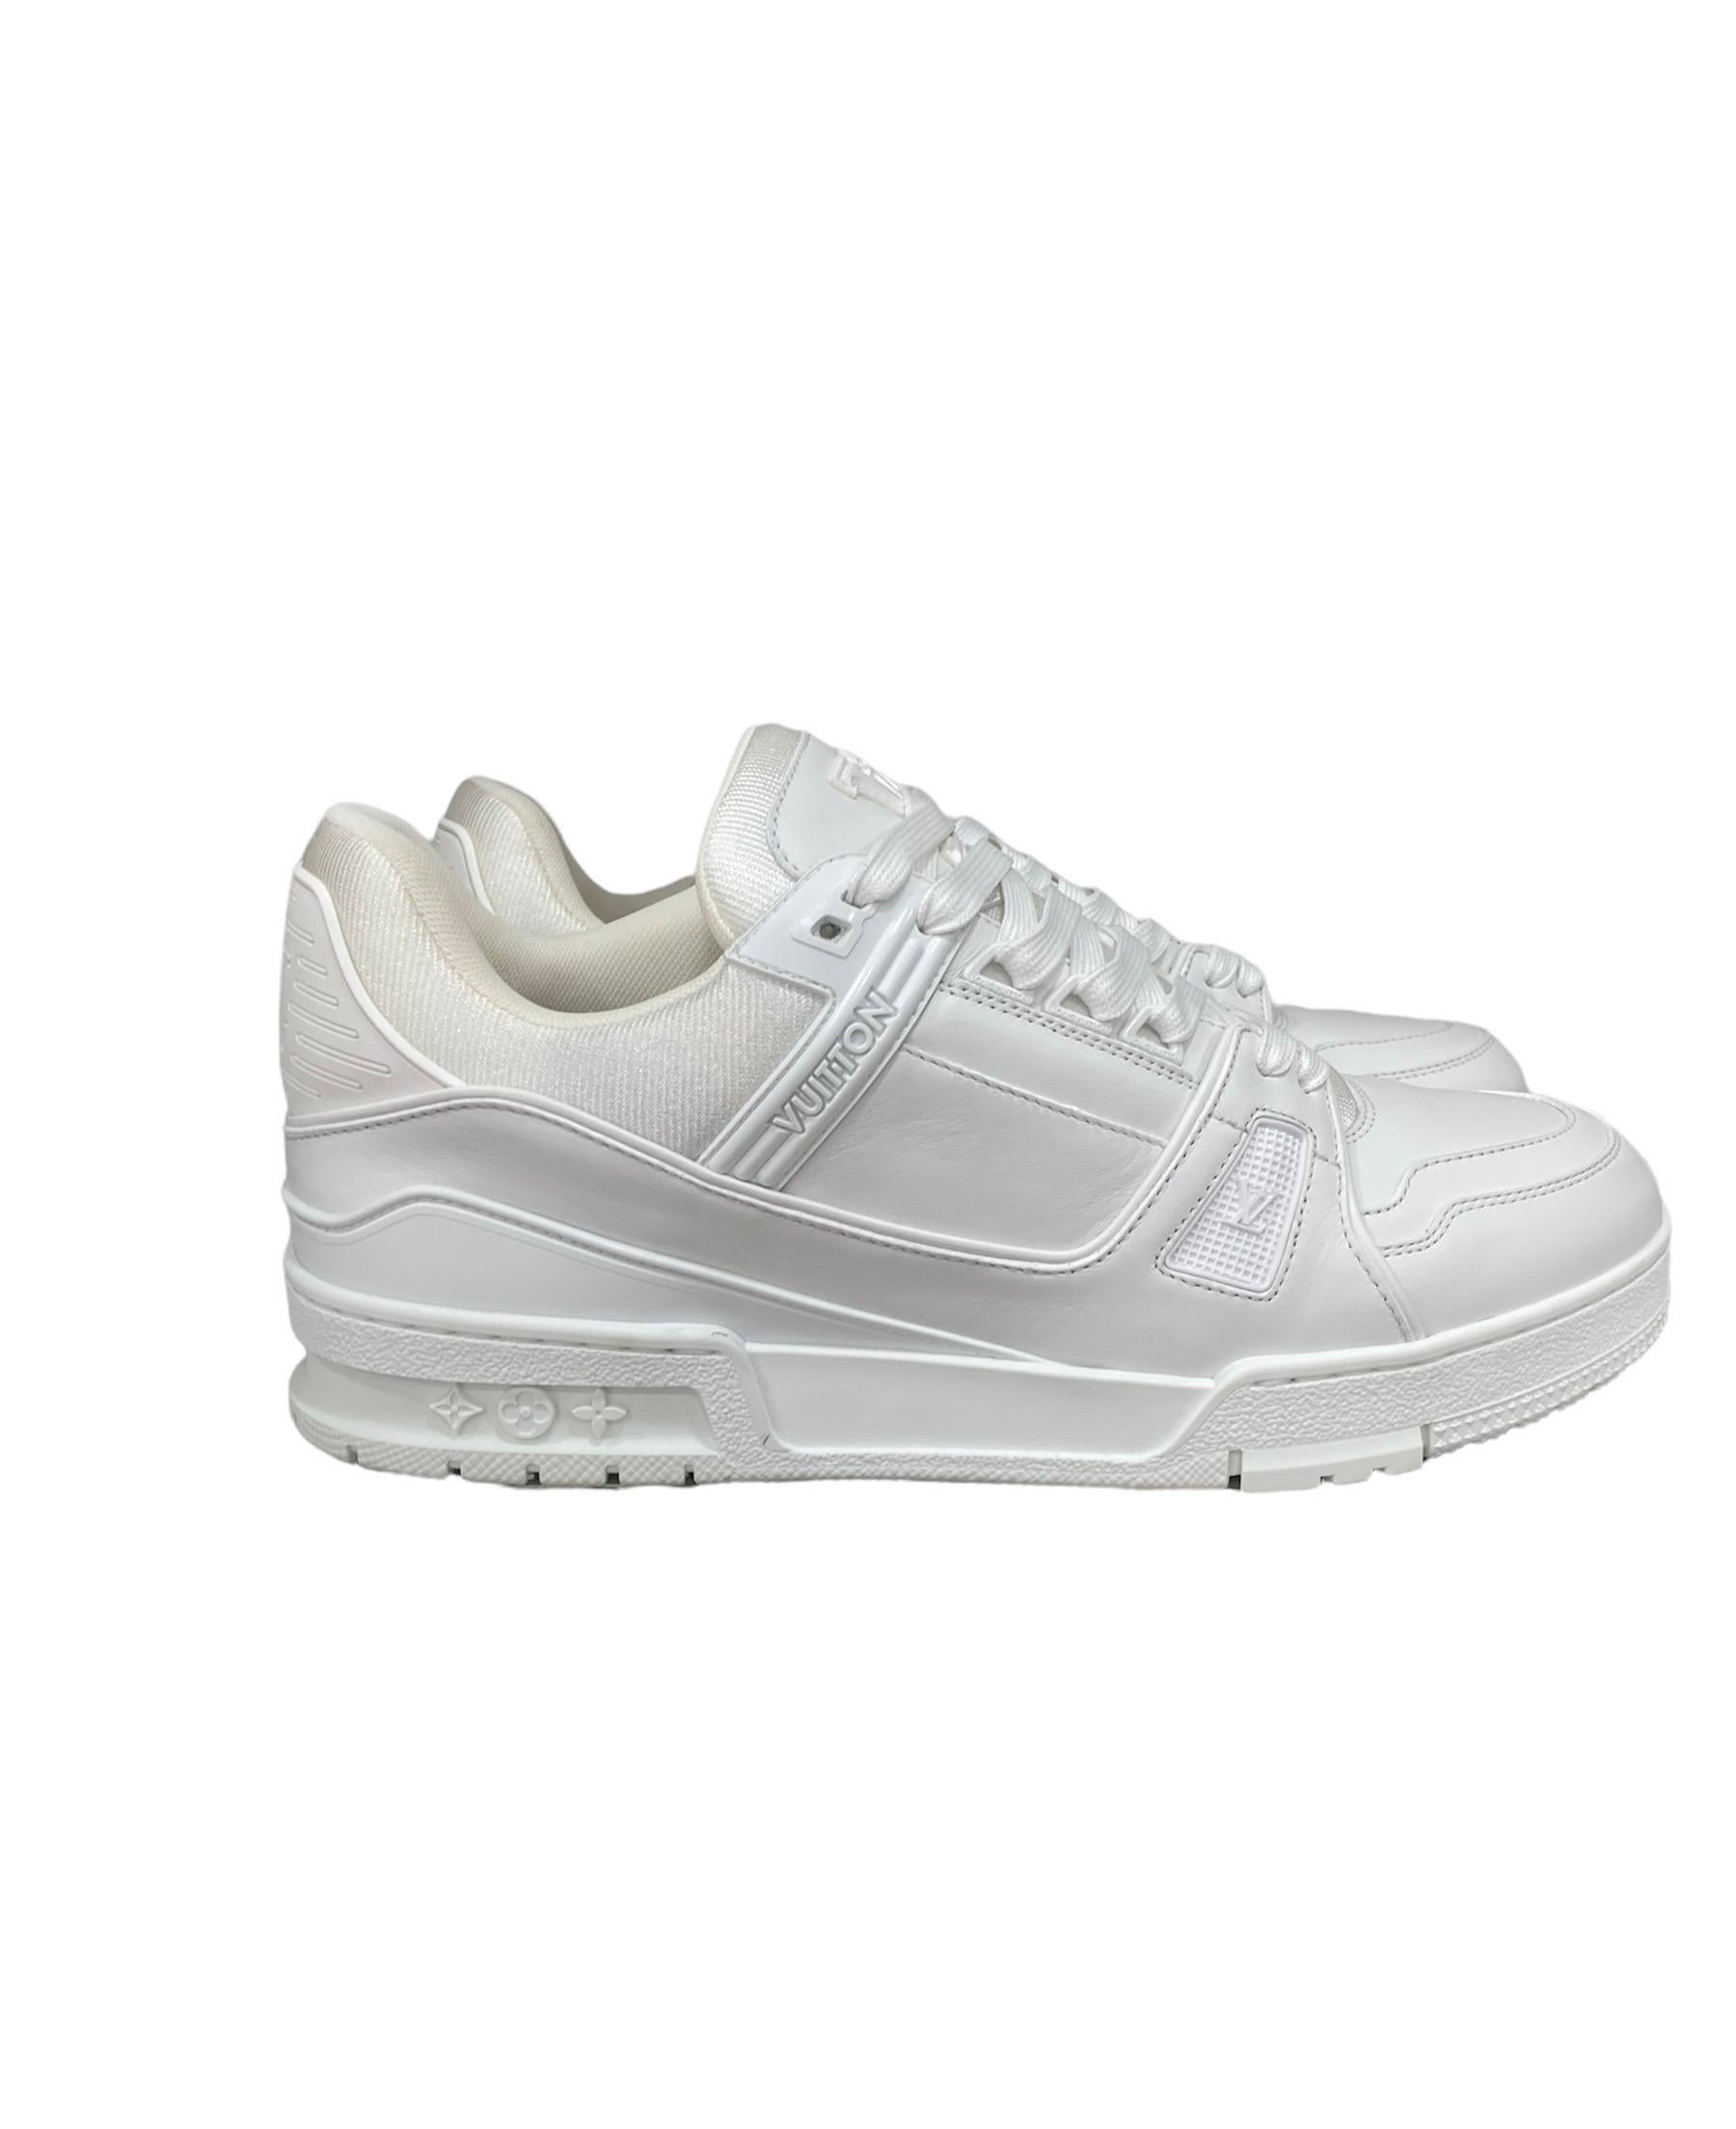 Louis Vuitton sneakers model Trainer made of white leather number 42.5 EU.
Worn only for testing, as seen from the sole. Complete with box. Like new.